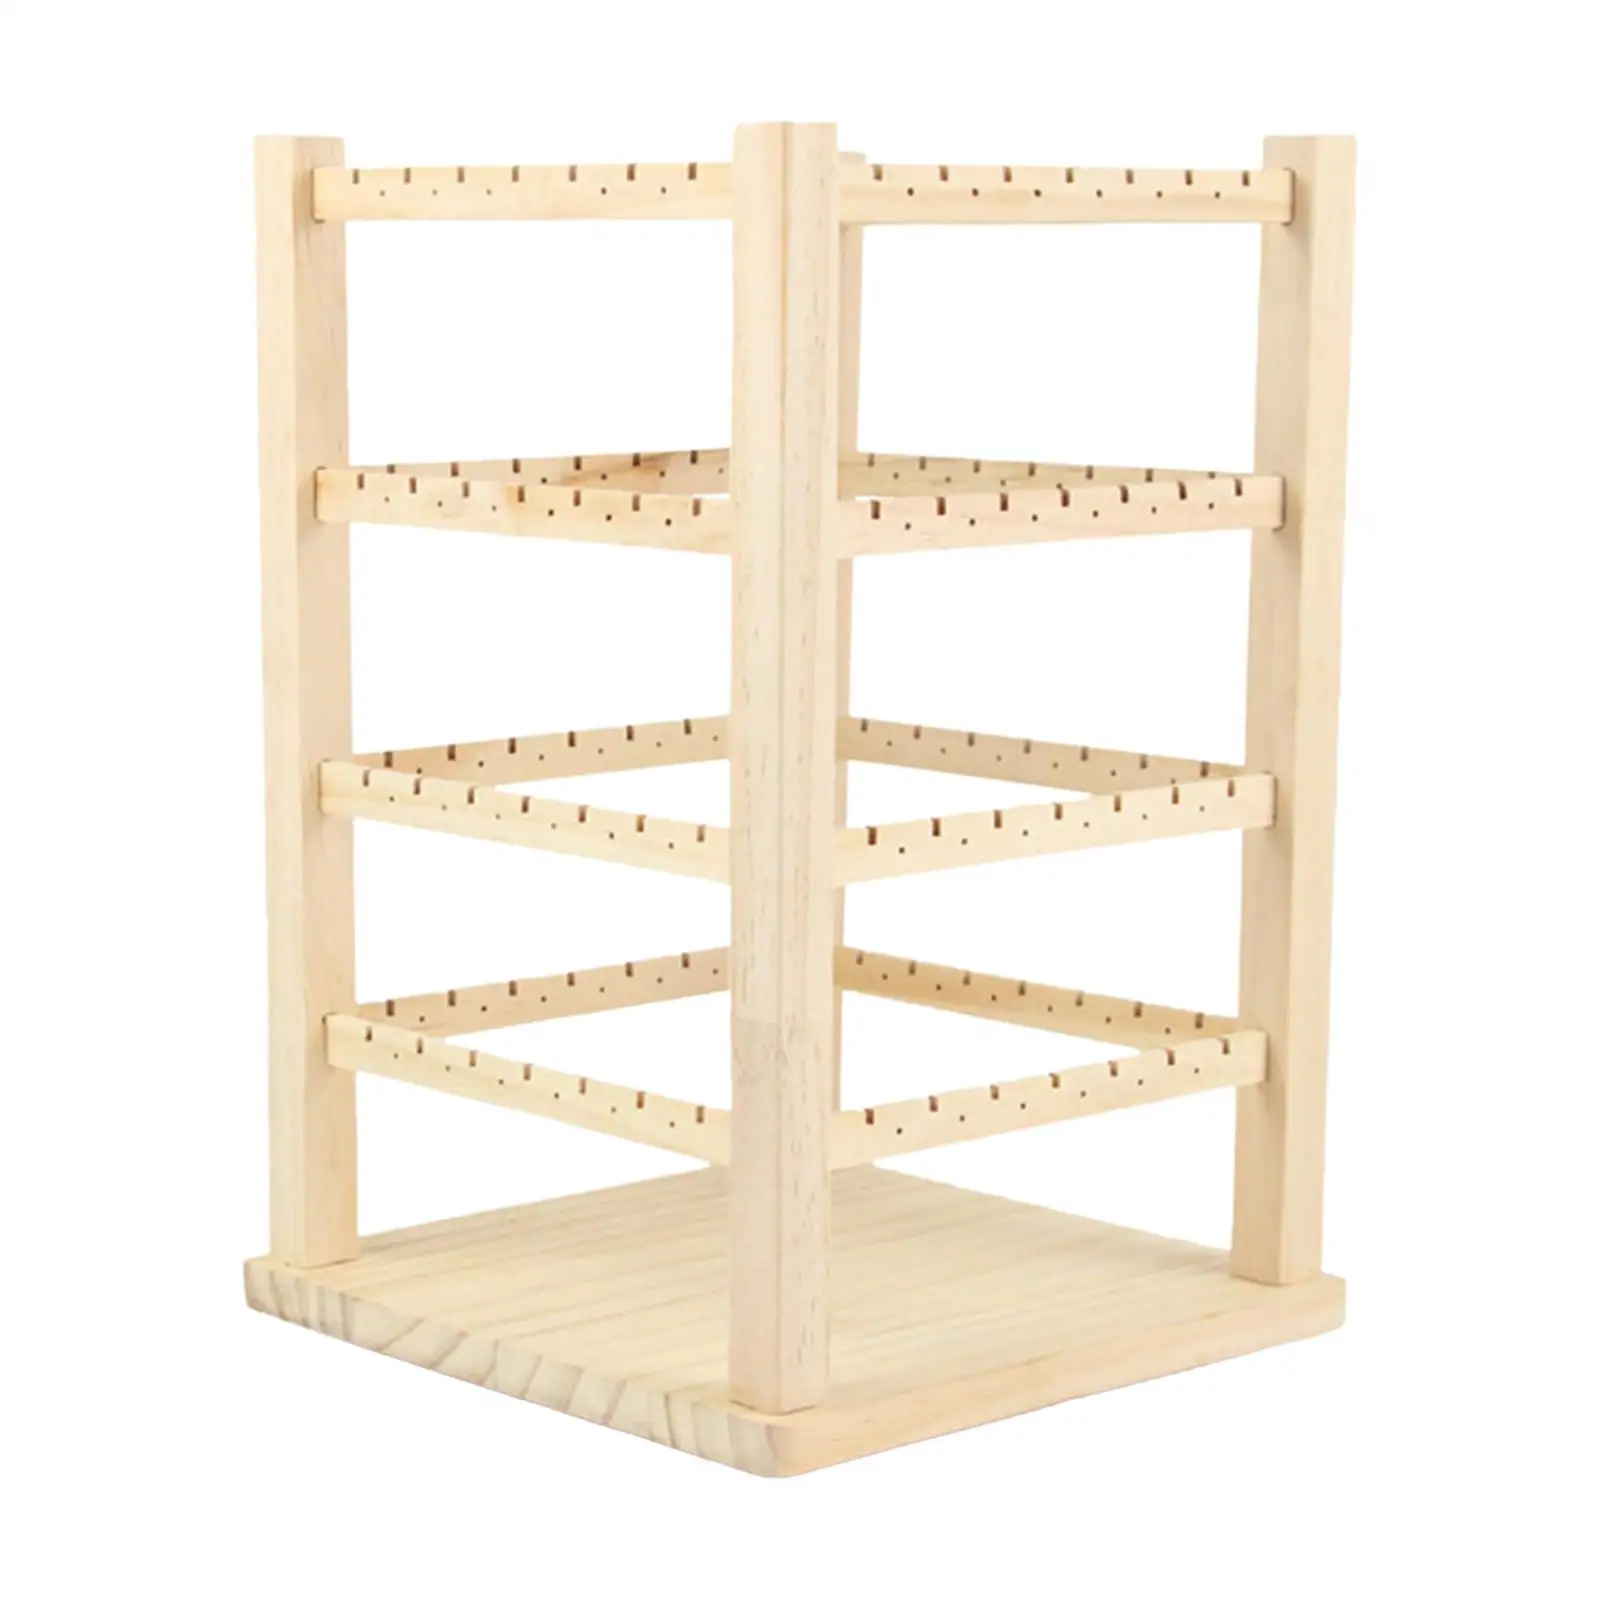 Earrings Display Stand Rotated Organizing Rack Organizer Holder for Bedroom